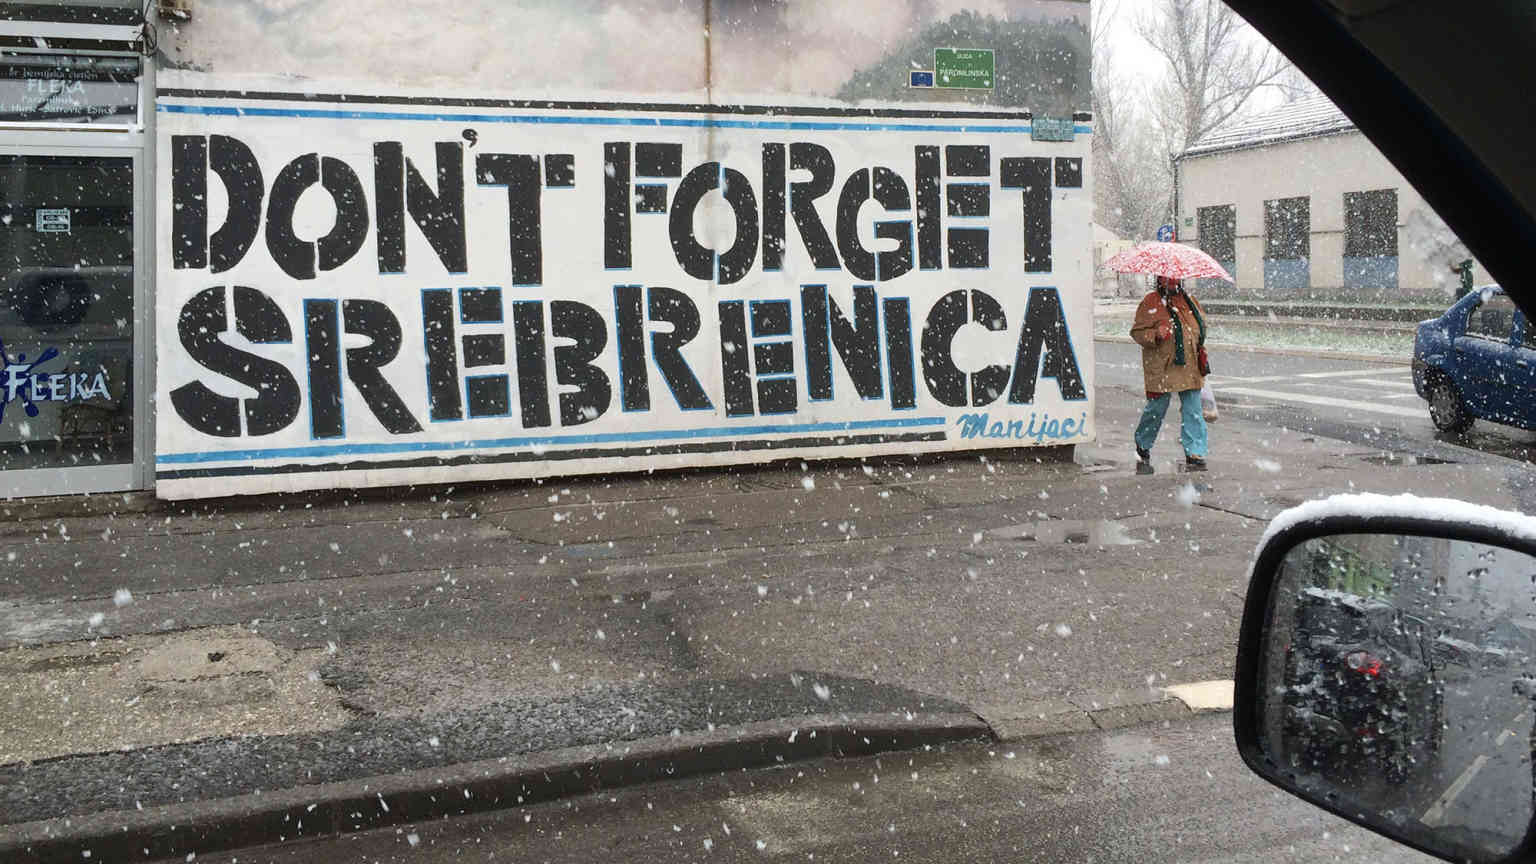 Srebrenica was a town in Bosnia and Herzegovina where 7,000 men and boys were killed as part of an ethnic cleansing exercise. Img from ard-wien.de.